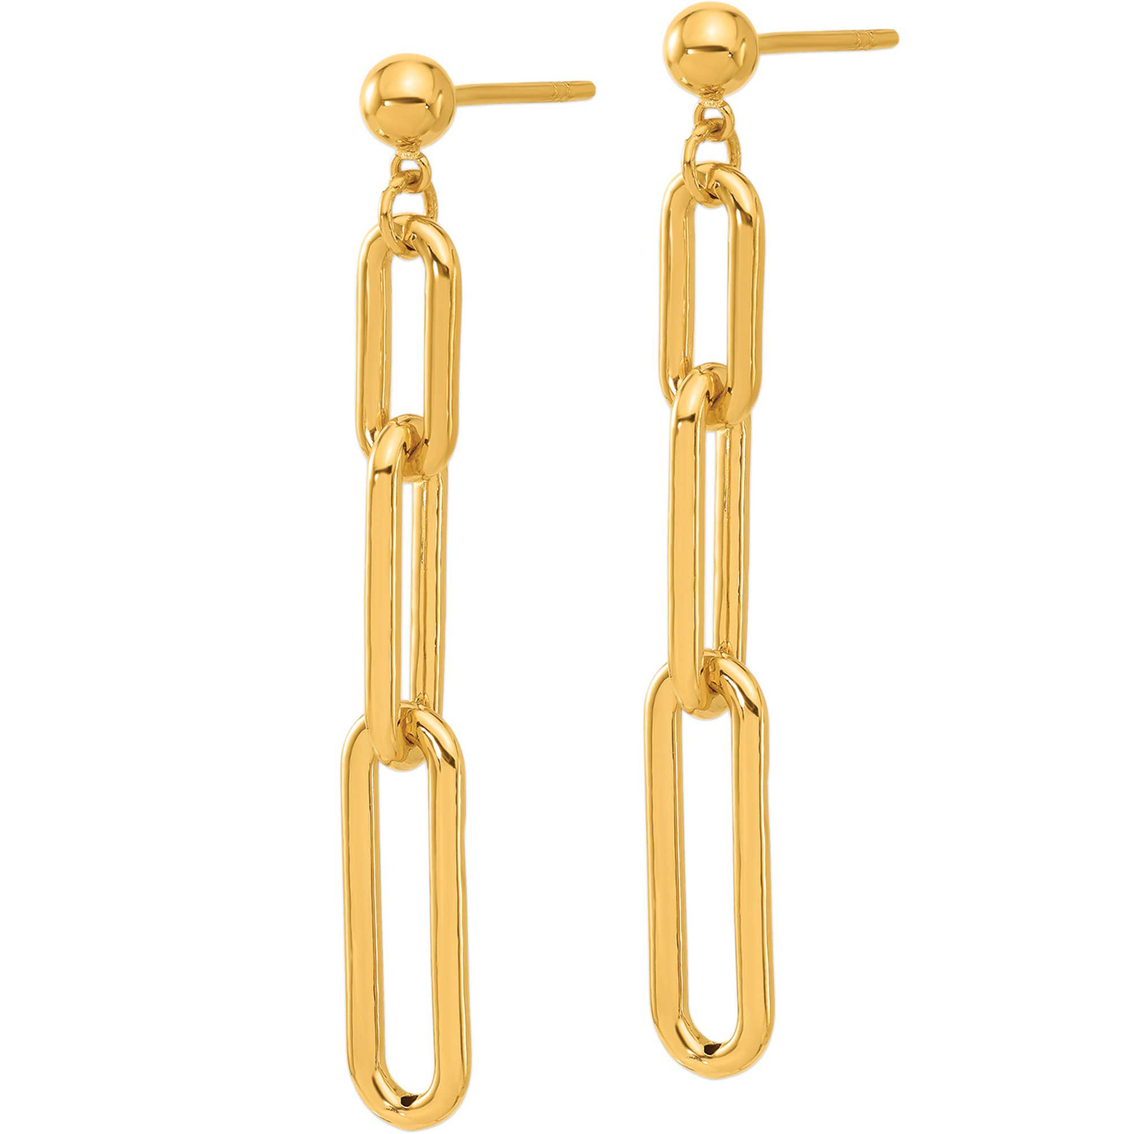 24K Pure Gold Paper Clip Triple Link Earrings - Image 2 of 3